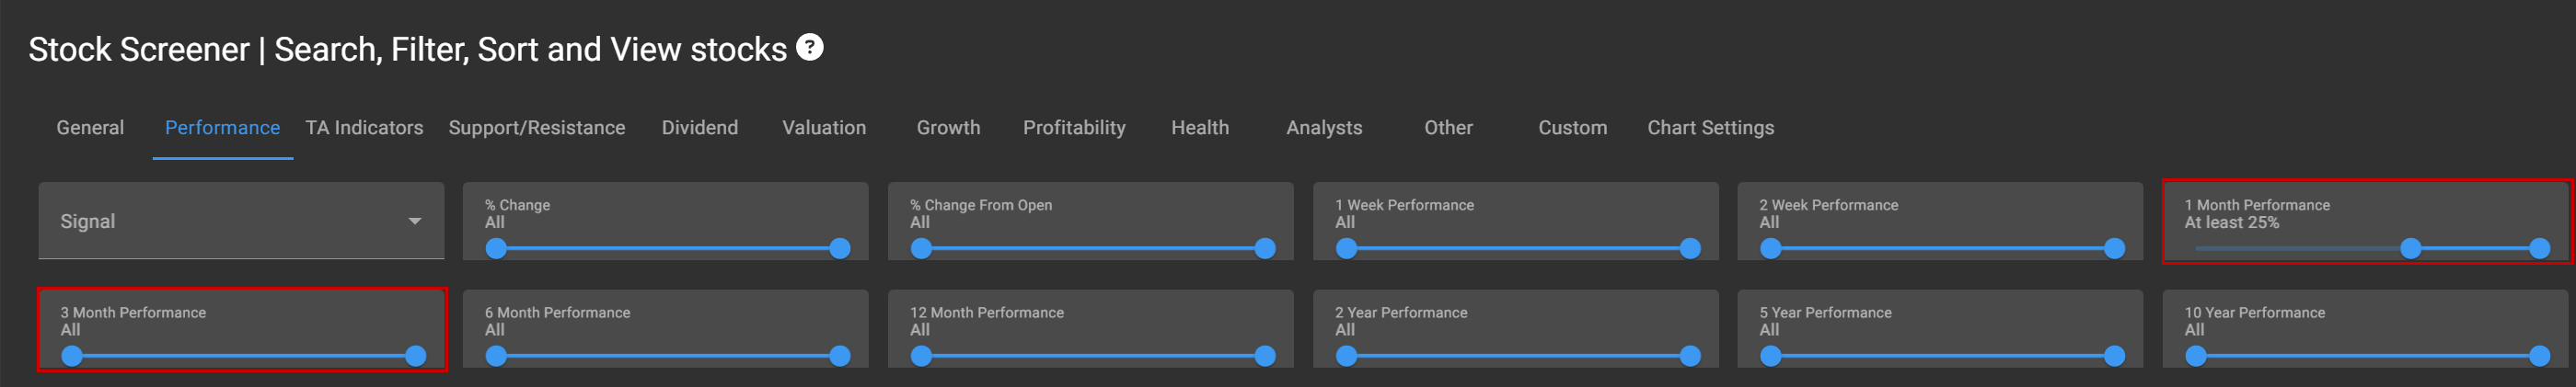 Performance filters in ChartMill